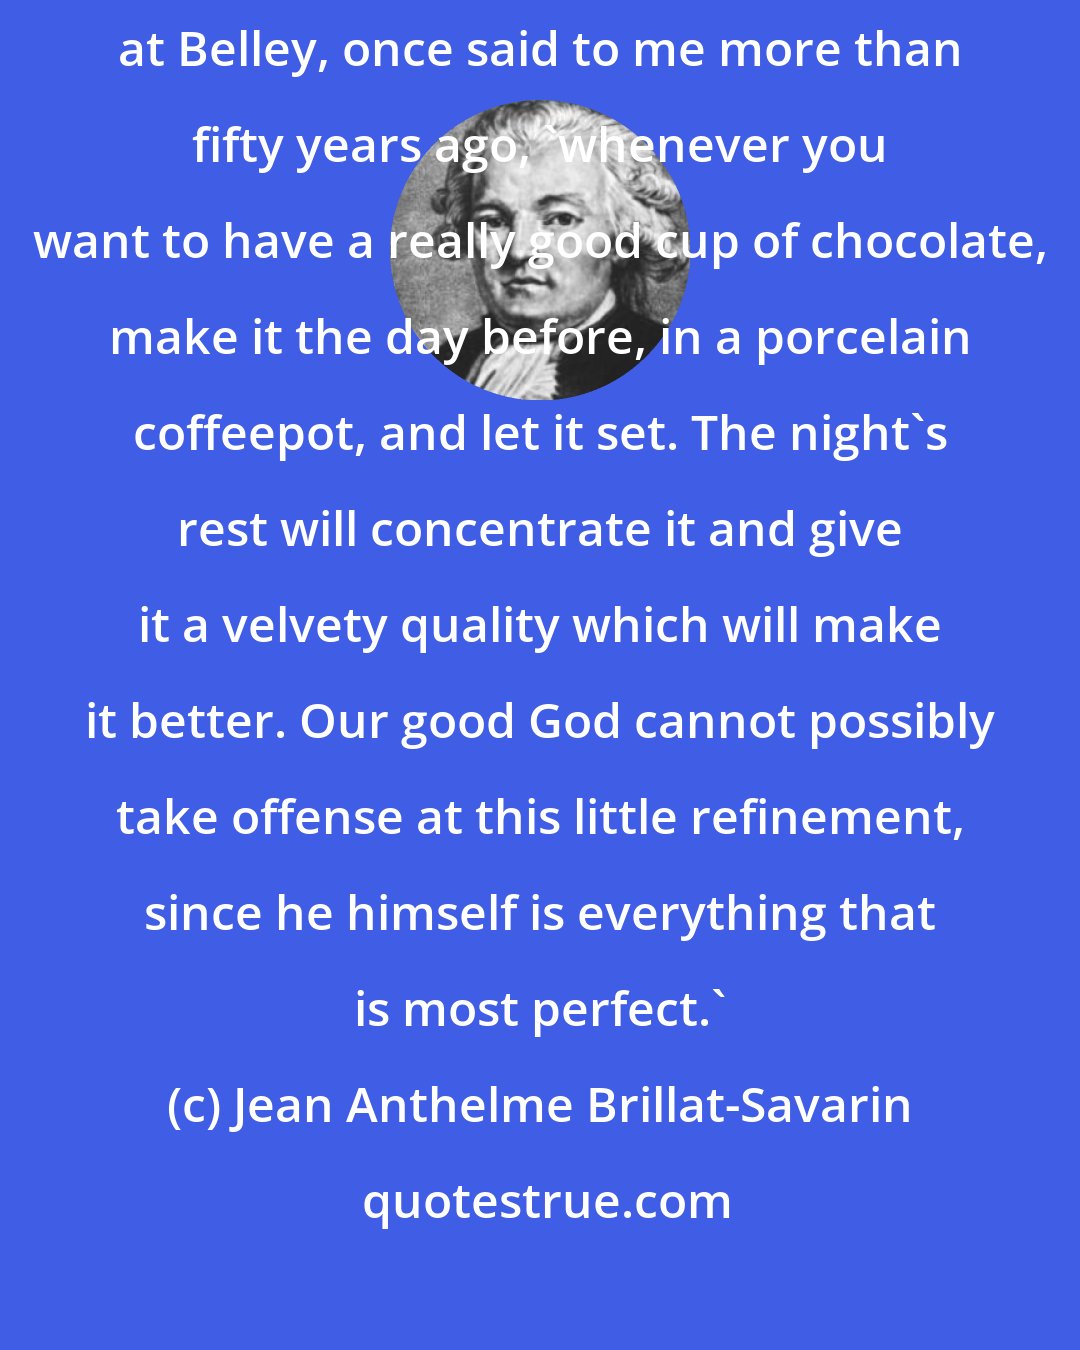 Jean Anthelme Brillat-Savarin: 'Monsieur,' Madame d'Arestel, Superior of the convent of the Visitation at Belley, once said to me more than fifty years ago, 'whenever you want to have a really good cup of chocolate, make it the day before, in a porcelain coffeepot, and let it set. The night's rest will concentrate it and give it a velvety quality which will make it better. Our good God cannot possibly take offense at this little refinement, since he himself is everything that is most perfect.'